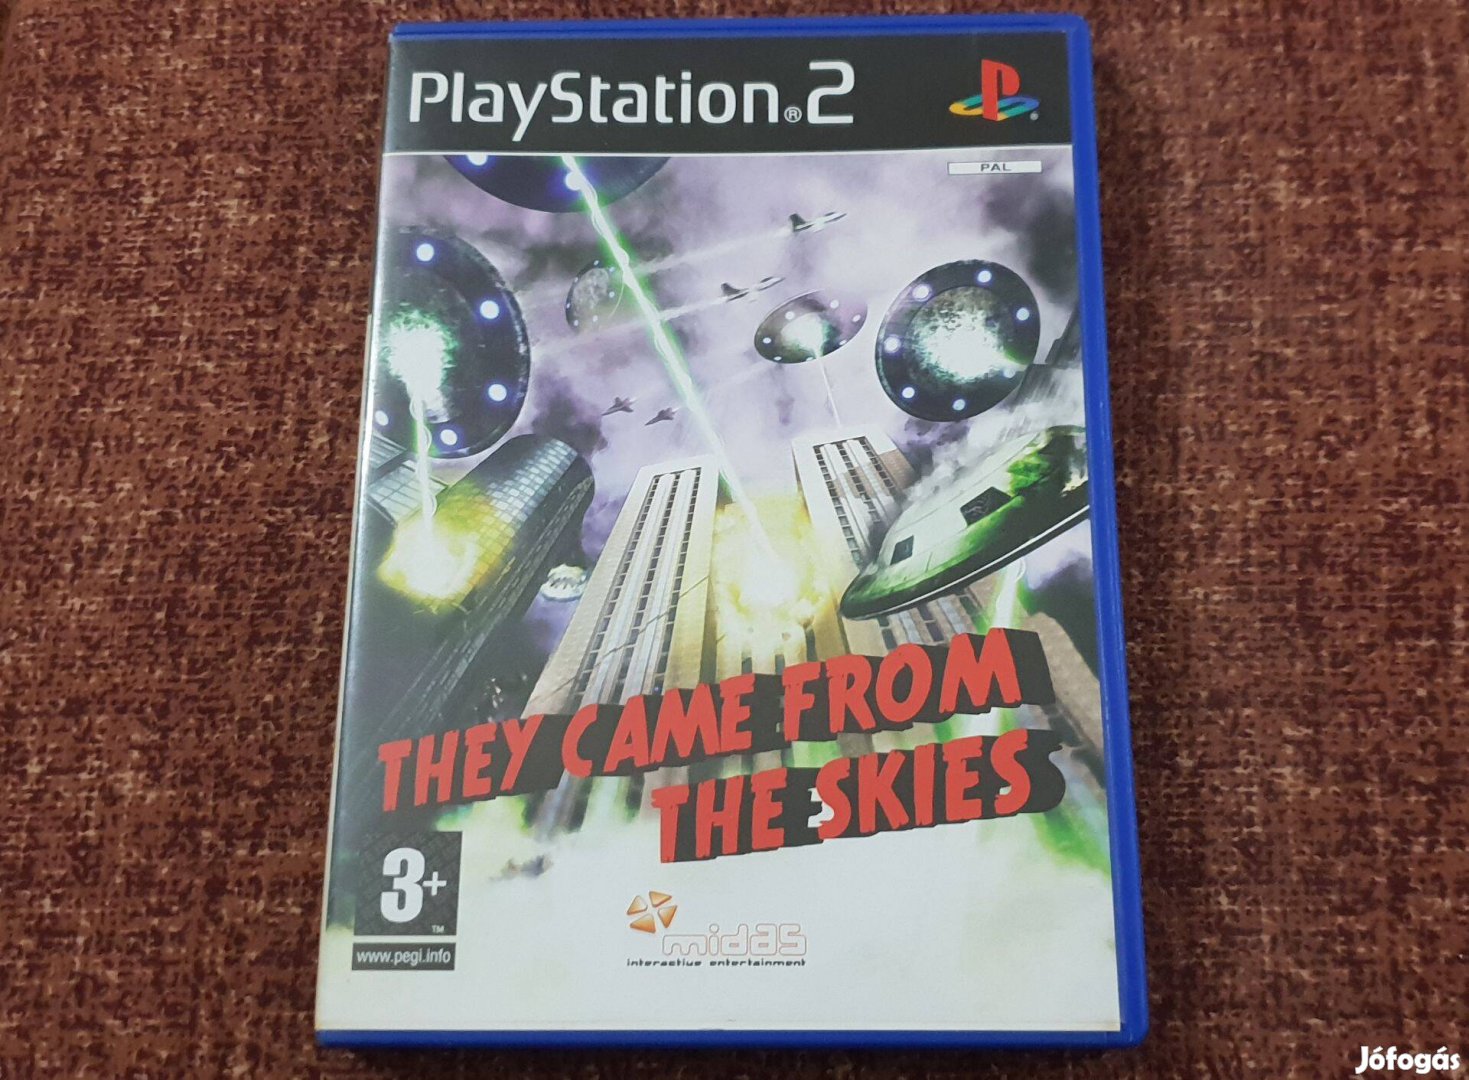 They Came From The Skies Playstation 2 eredeti lemez ( 2500 Ft )